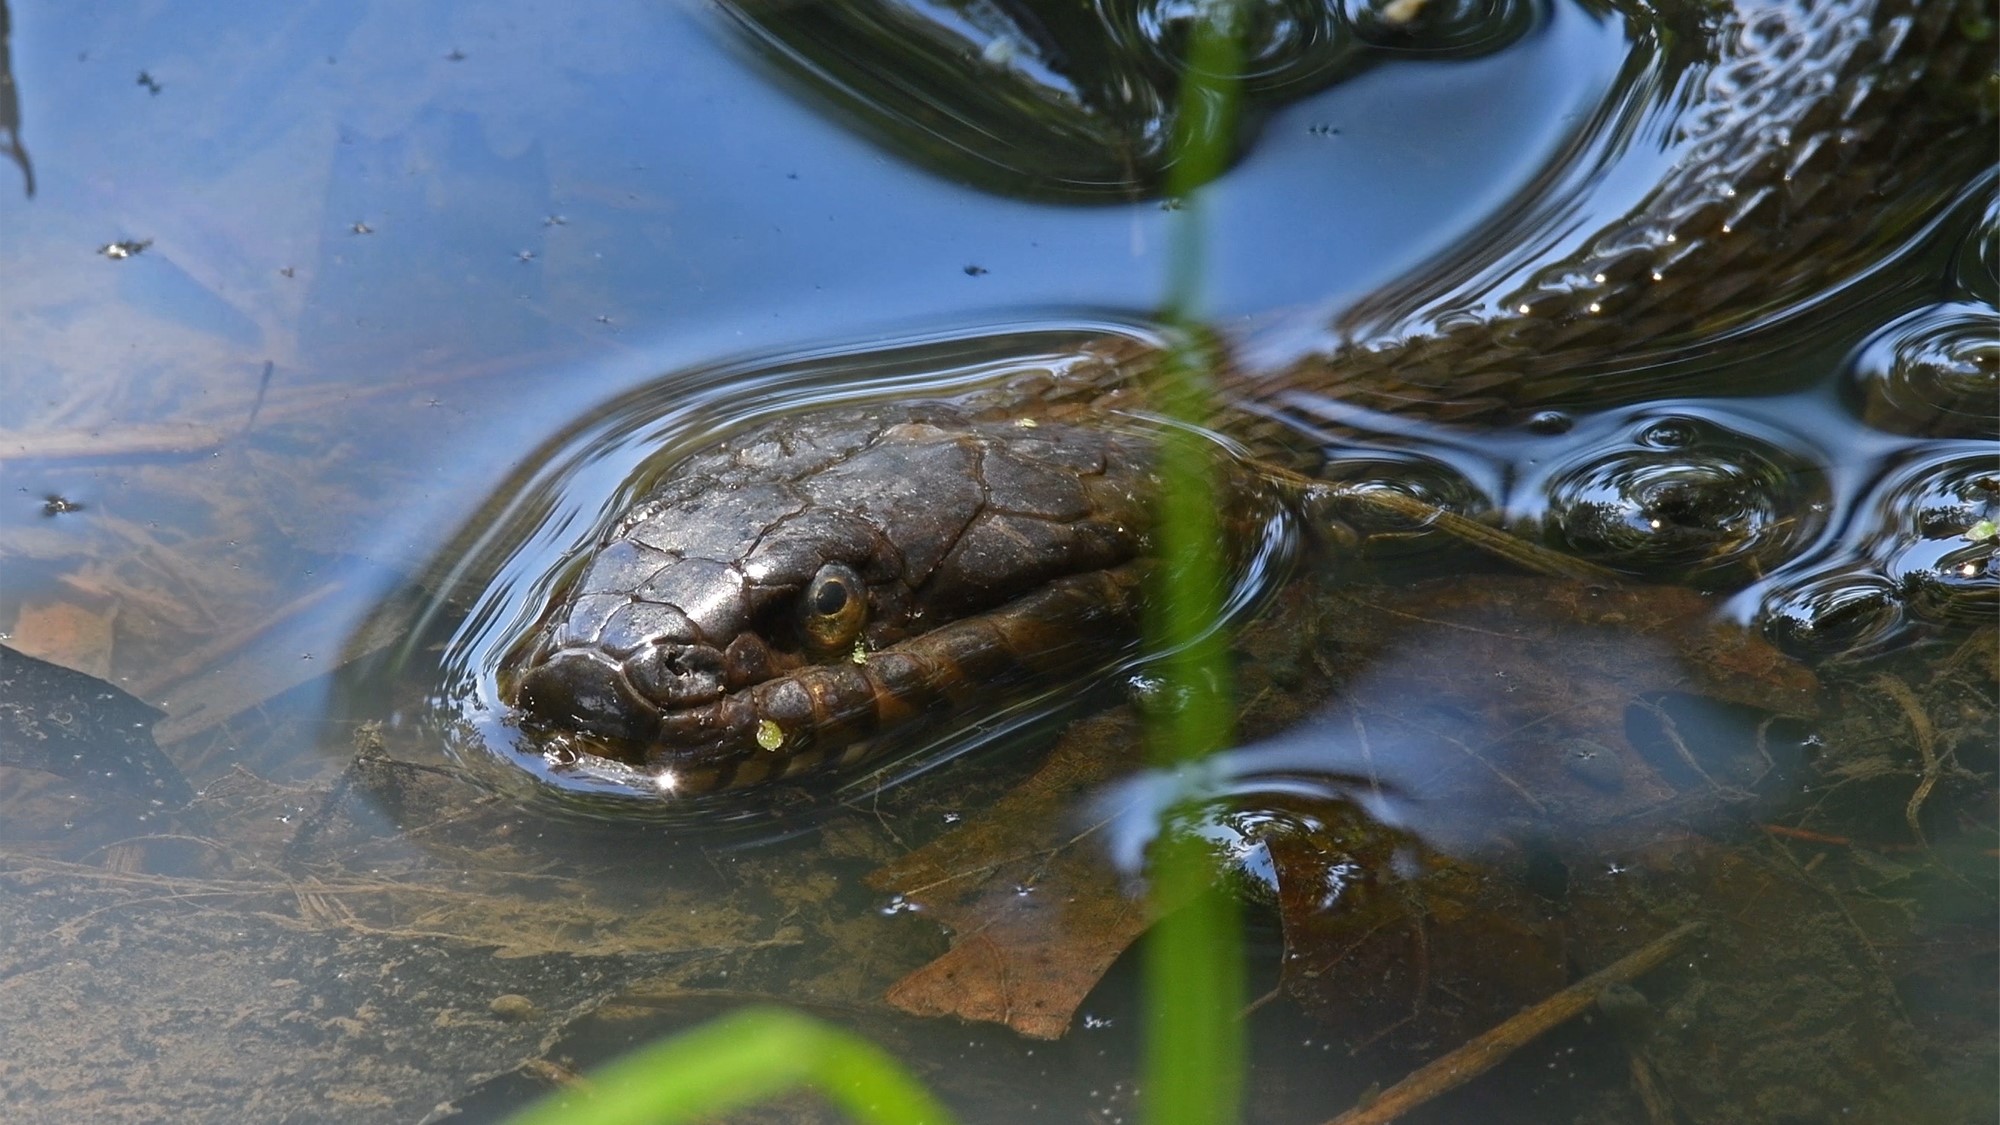 A northern water snake in the water.